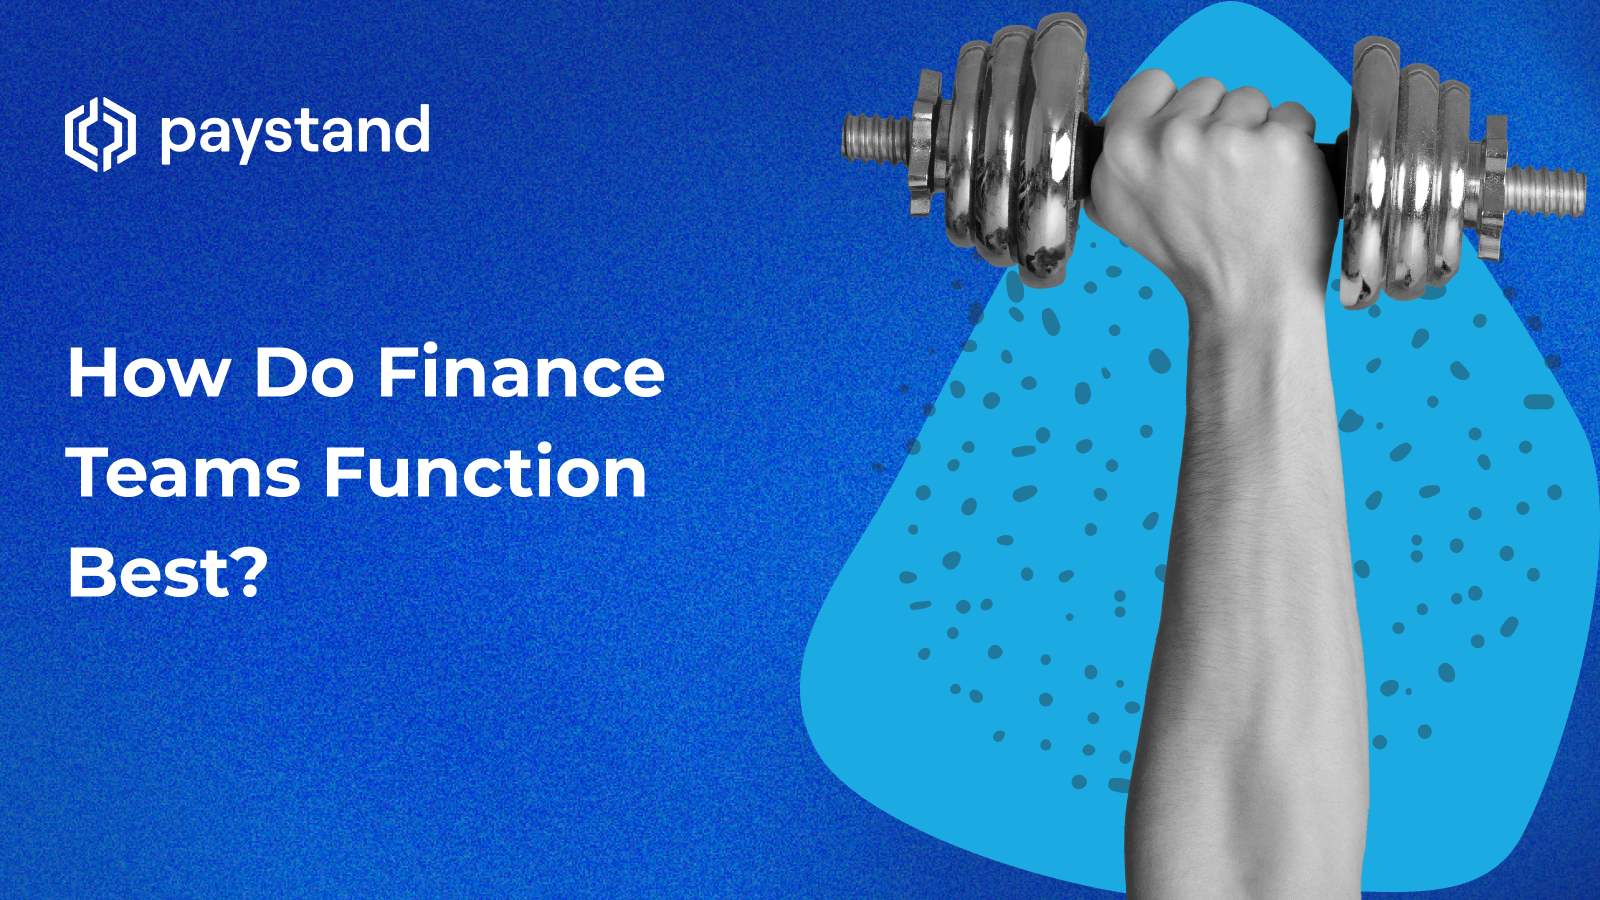 How Do Finance Teams Function Best?